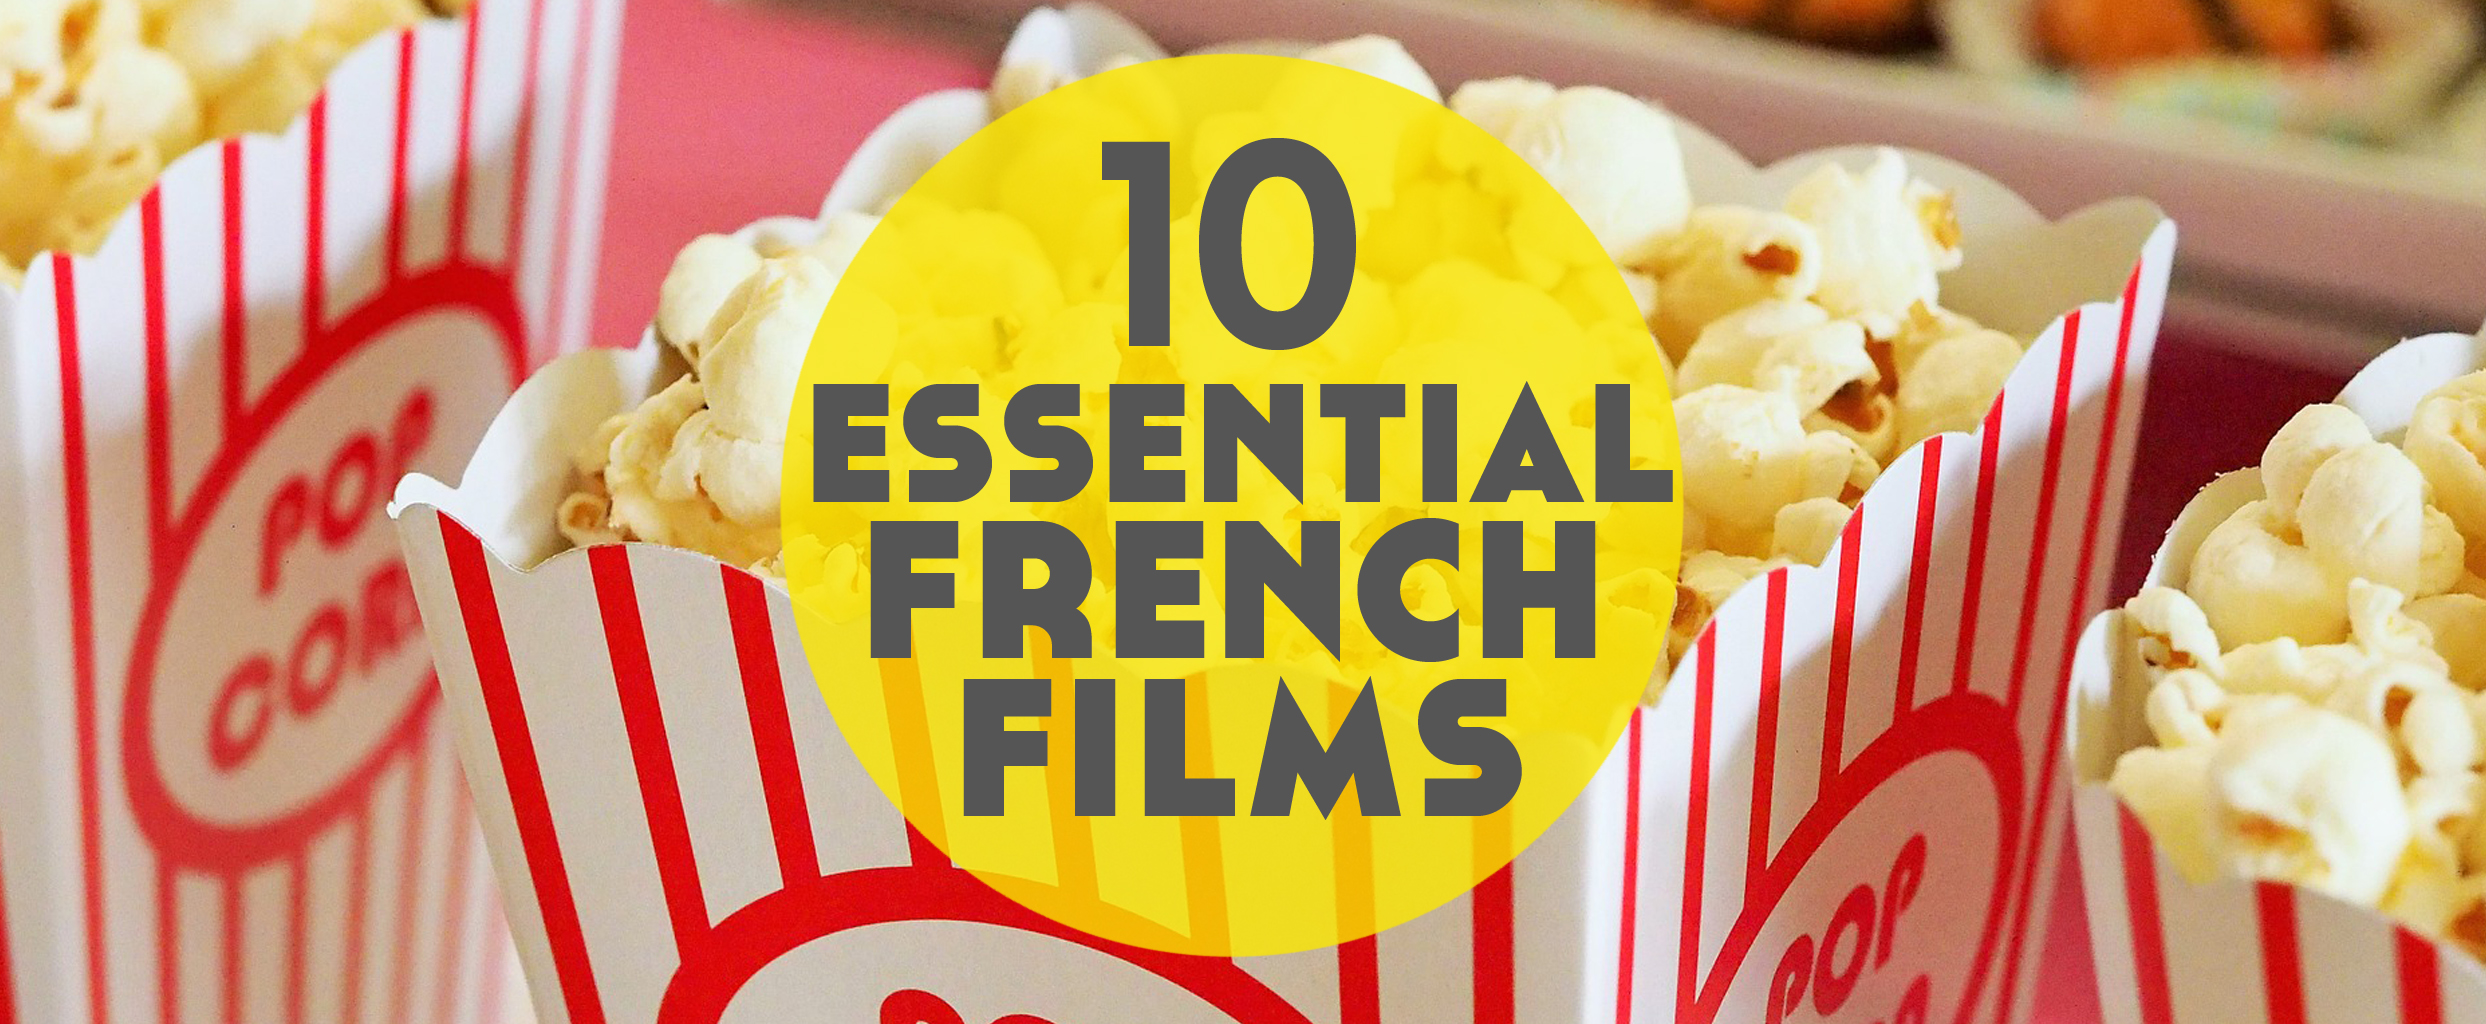 10 Essential French Films to Fall in Love With to Help You Learn the ...